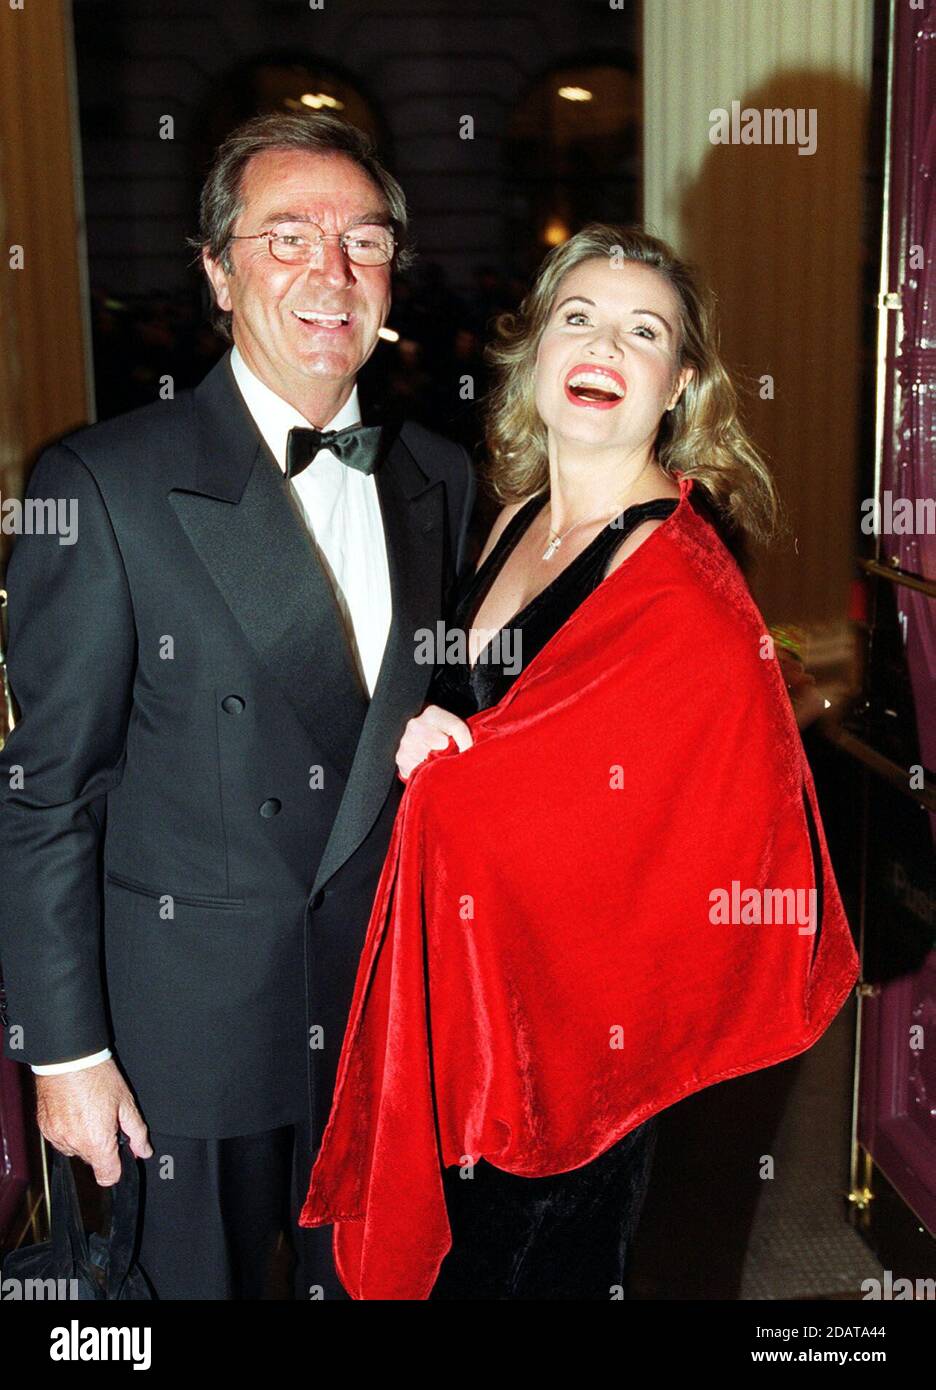 File photo dated 19/10/1999 of Des O'Connor, and partner, singer Jodie Wilson. Des O'Connor, 88, who sadly passed away on Saturday 14 November. His agent confirmed he had been admitted to hospital just over a week ago, following a fall at his home in Buckinghamshire. Unfortunately yesterday evening his condition suddenly deteriorated and he drifted peacefully away in his sleep. Stock Photo